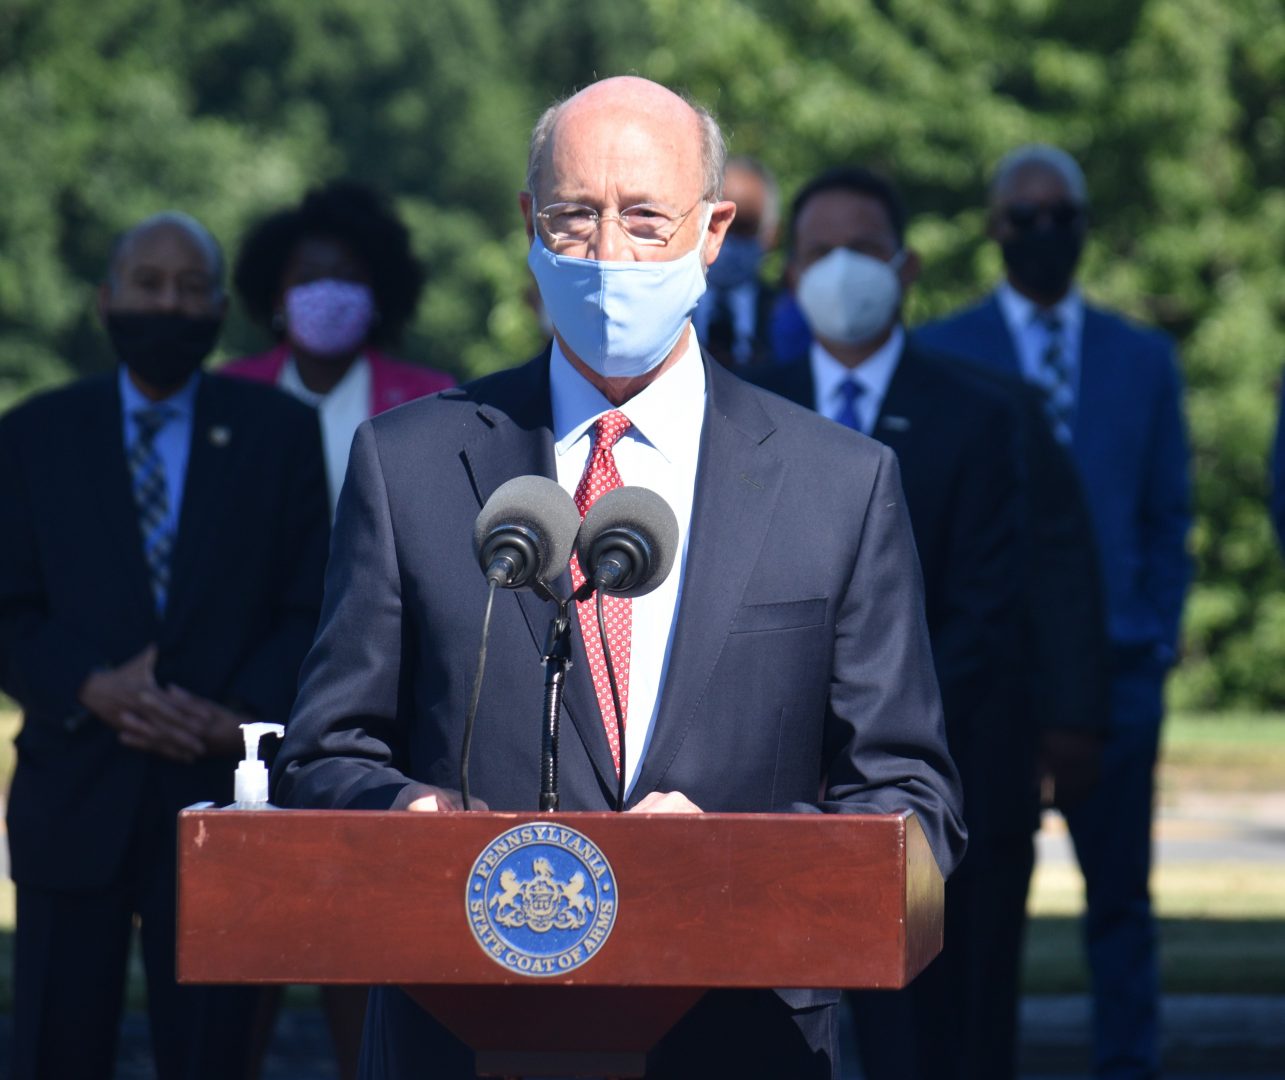 Gov. Tom Wolf speaks during a news conference outside the Pennsylvania Commission on Crime and Delinquency in Harrisburg, Pa., on July 14, 2020.